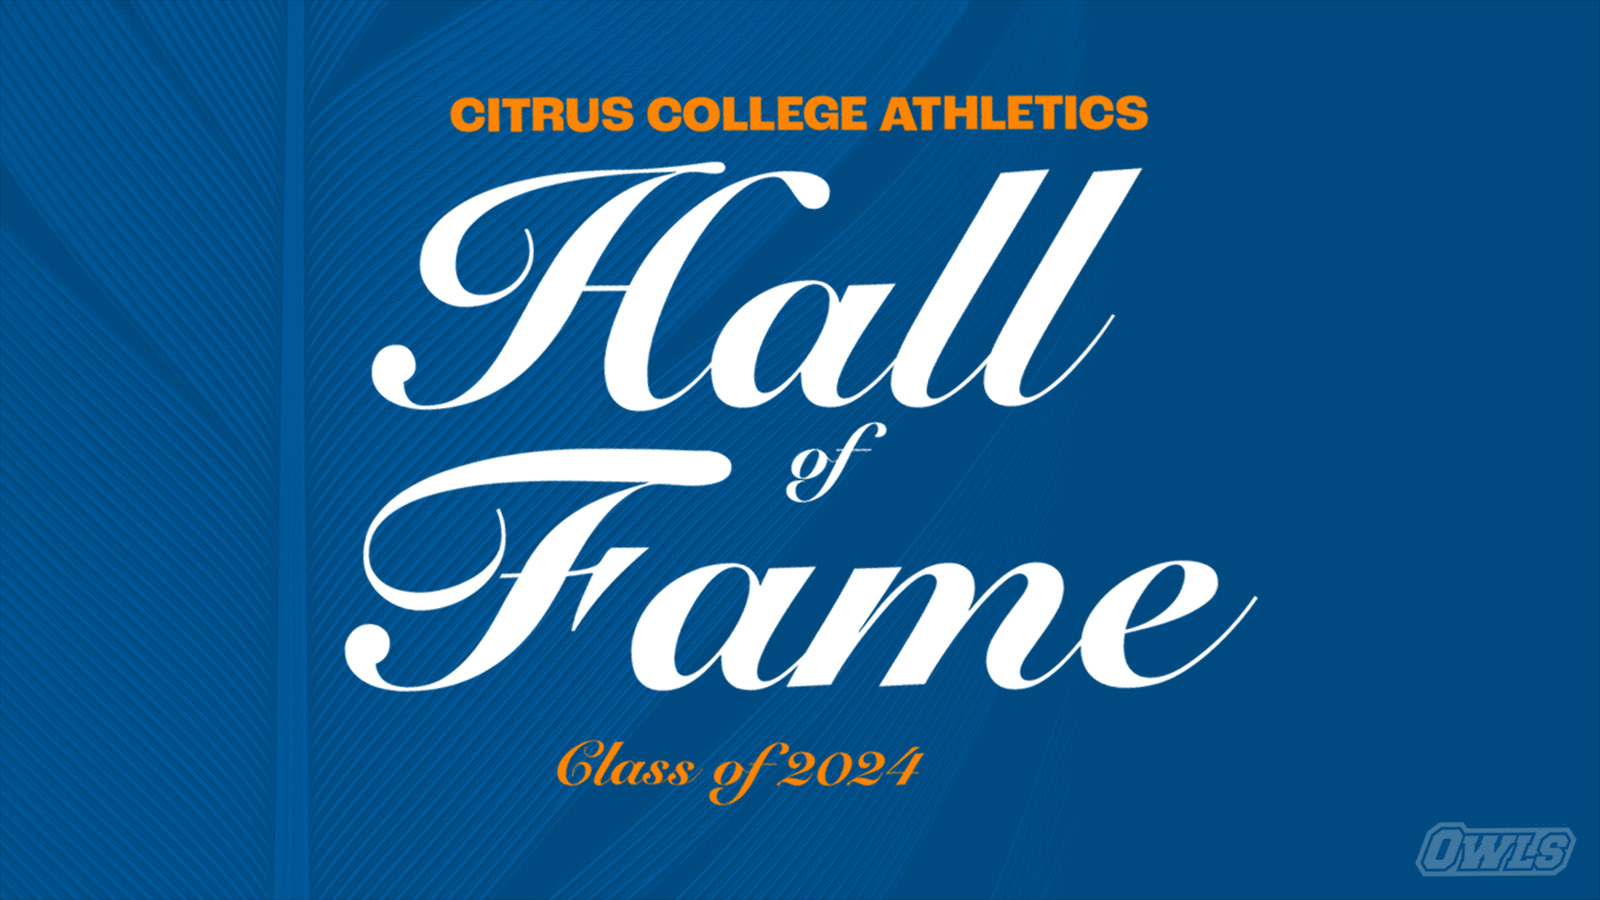 Citrus Athletics Announces First Hall of Fame Class